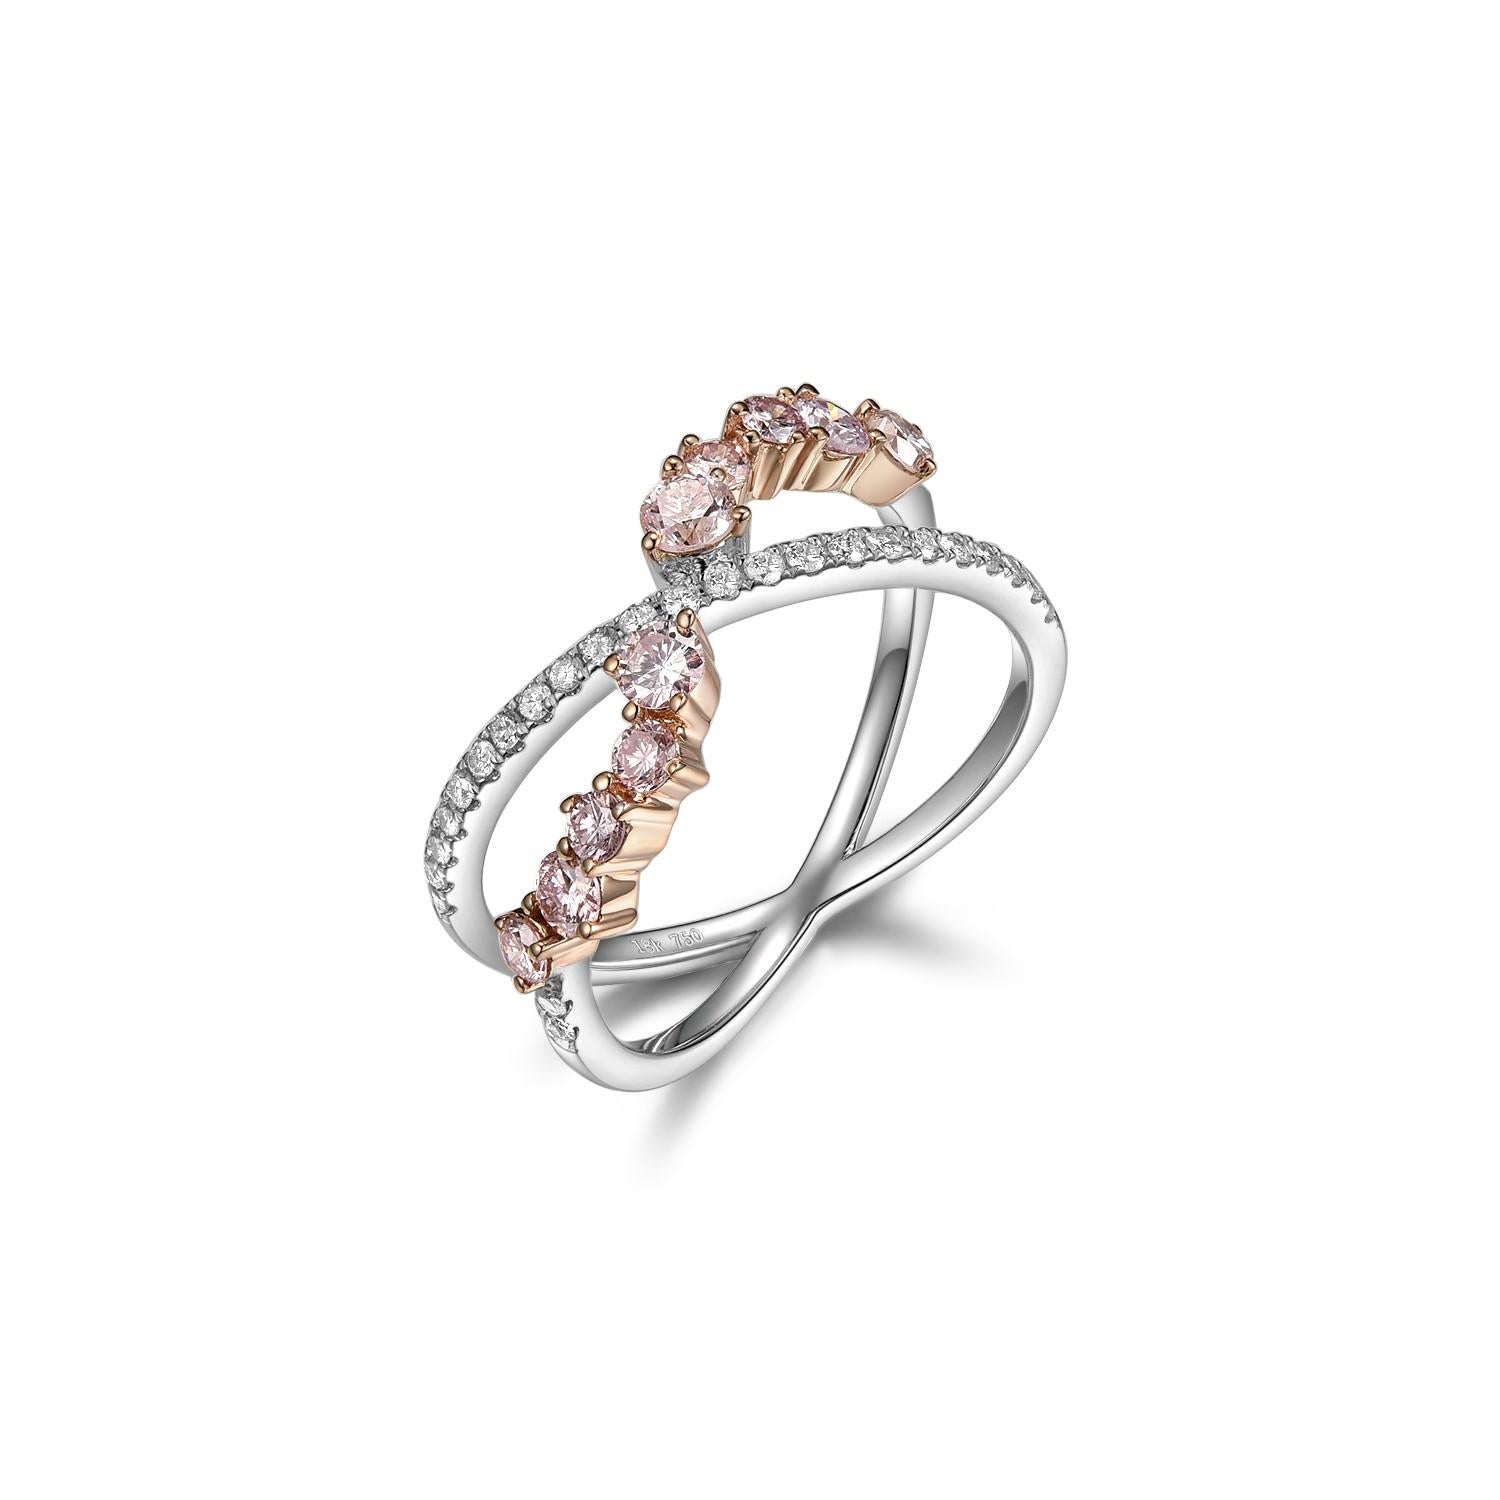 Introducing a work of art and elegance: a stunning cluster ring meticulously hand-set in a blend of 18 karat rose and white gold. This piece boasts the allure of Fancy Pink diamonds, a true testament to nature's grandeur. A total of 10 pink